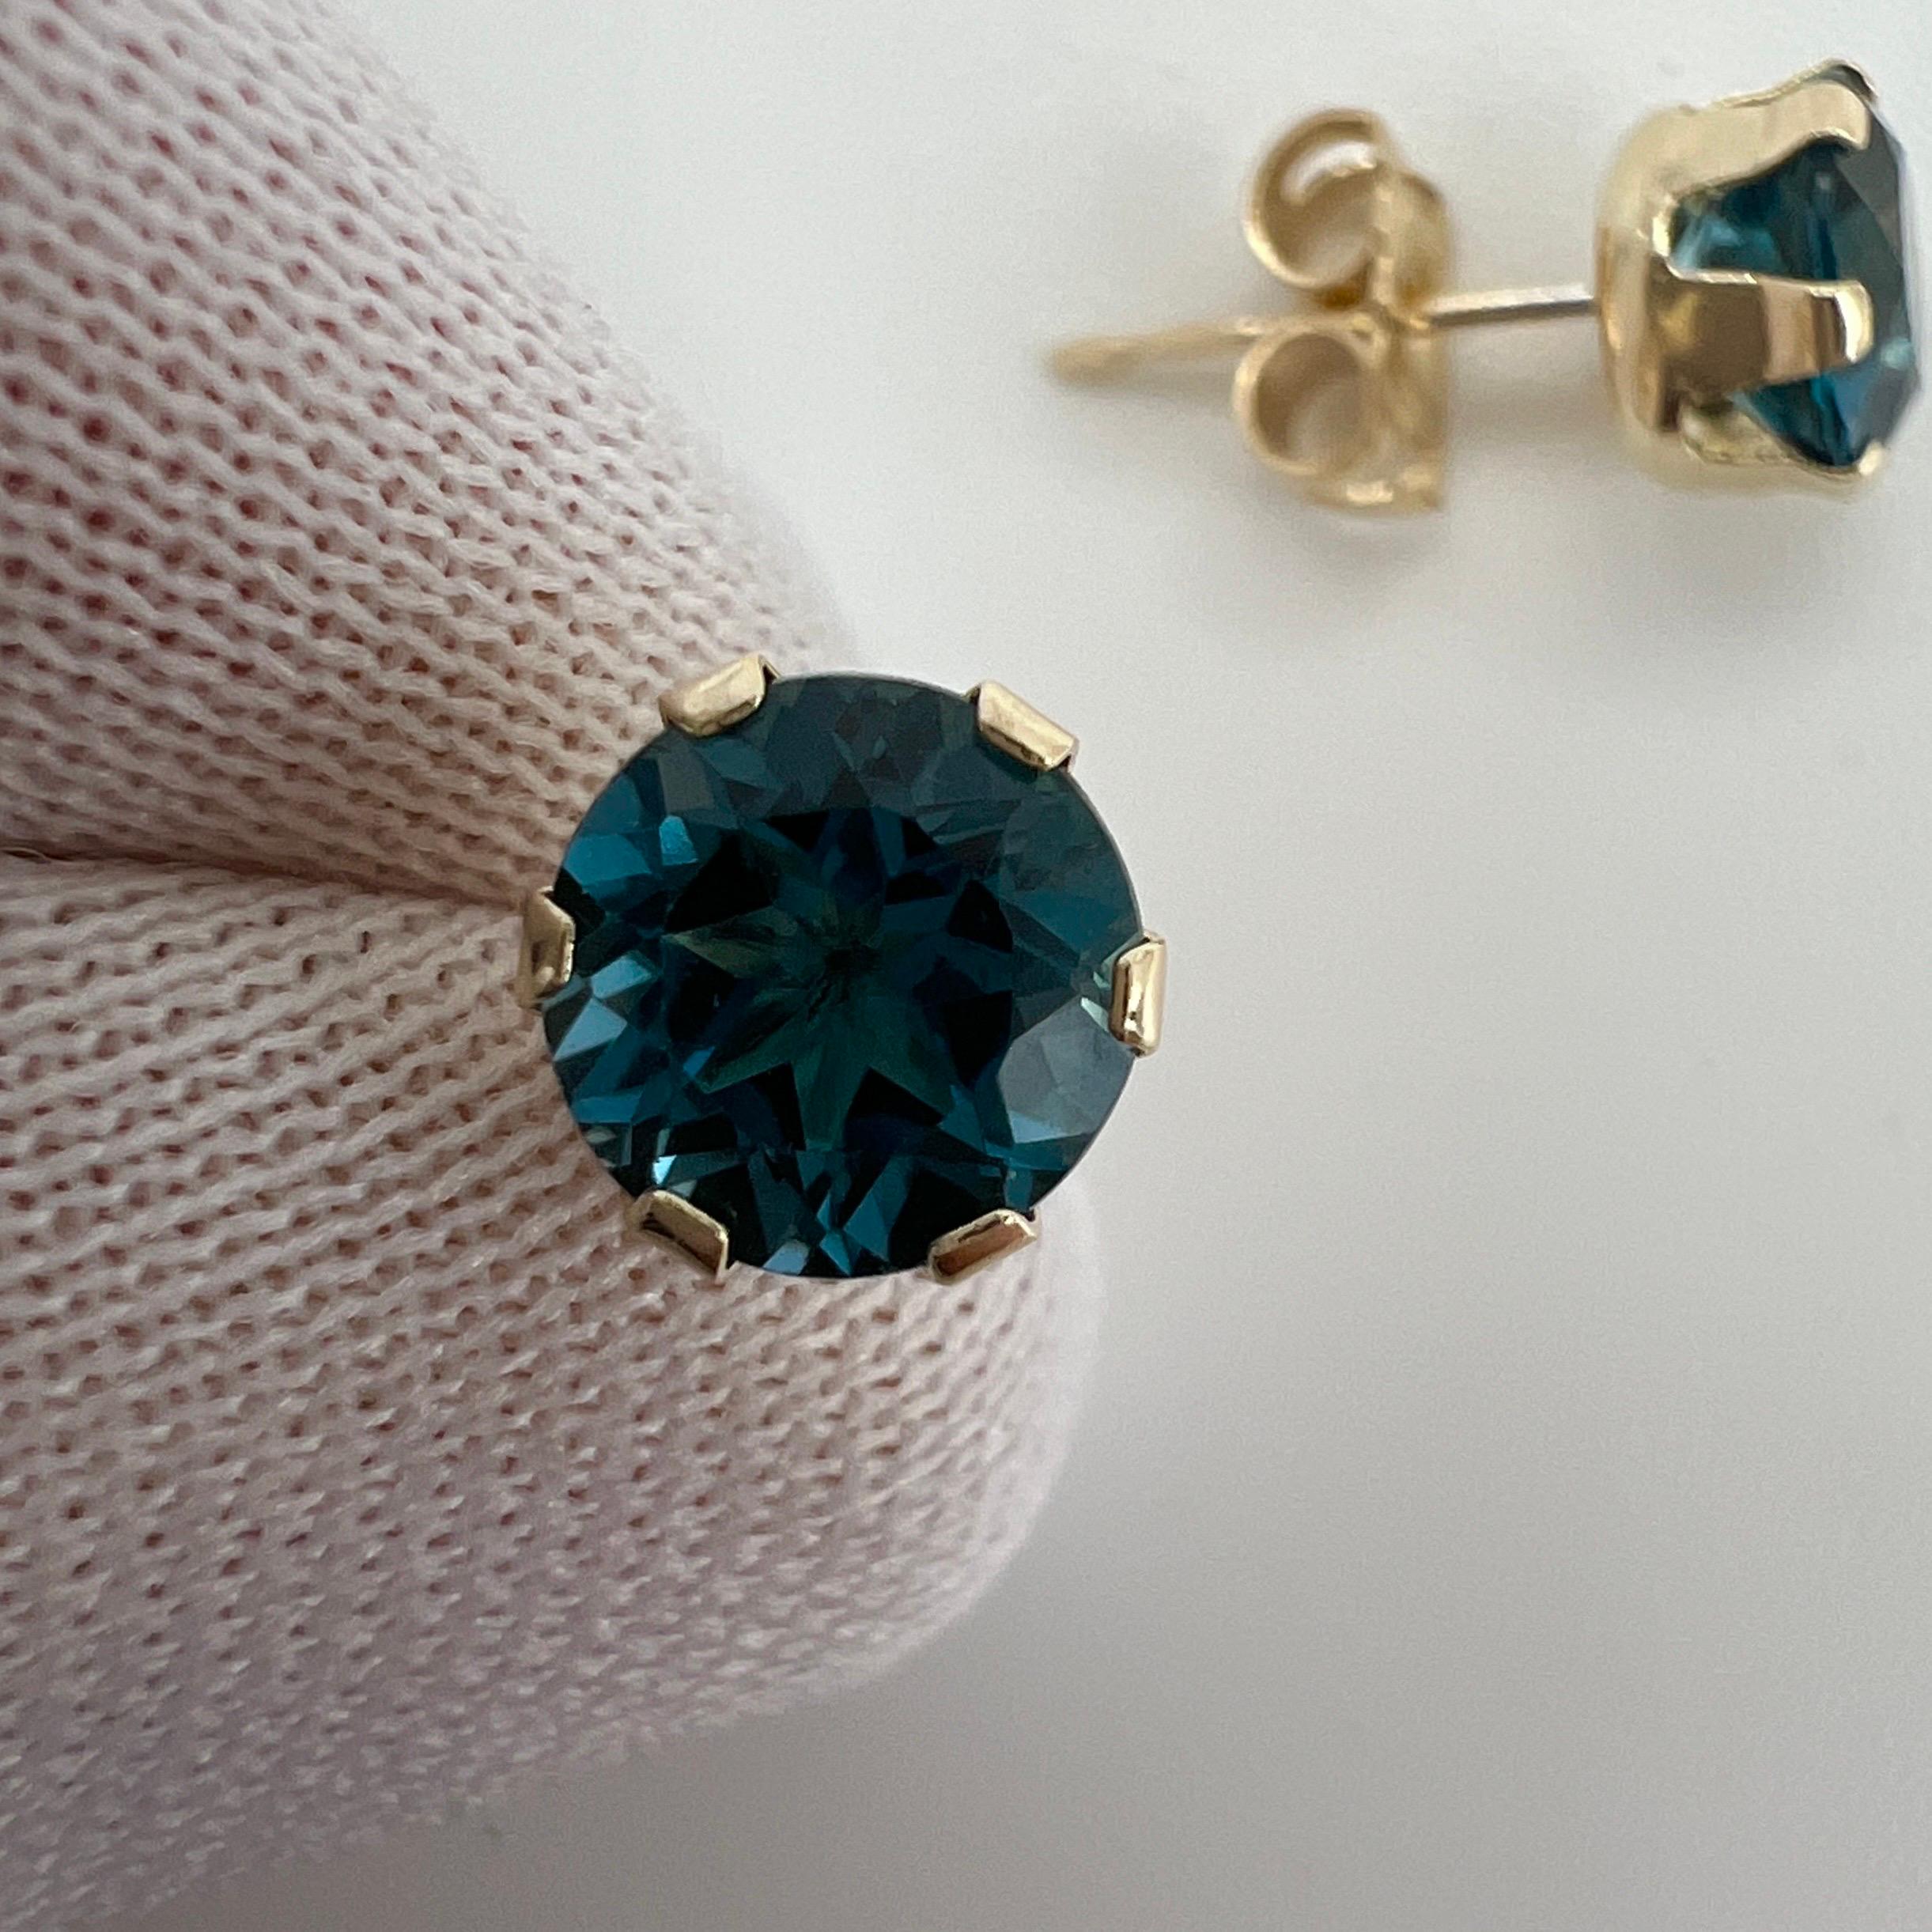 Natural London Blue Topaz 2 Carat Yellow Gold Earring Studs.

Beautiful 6mm matching pair of round topaz with vivid London blue colour, excellent clarity and an excellent round brilliant cut.

Set in lightweight 9k yellow gold suds with butterfly